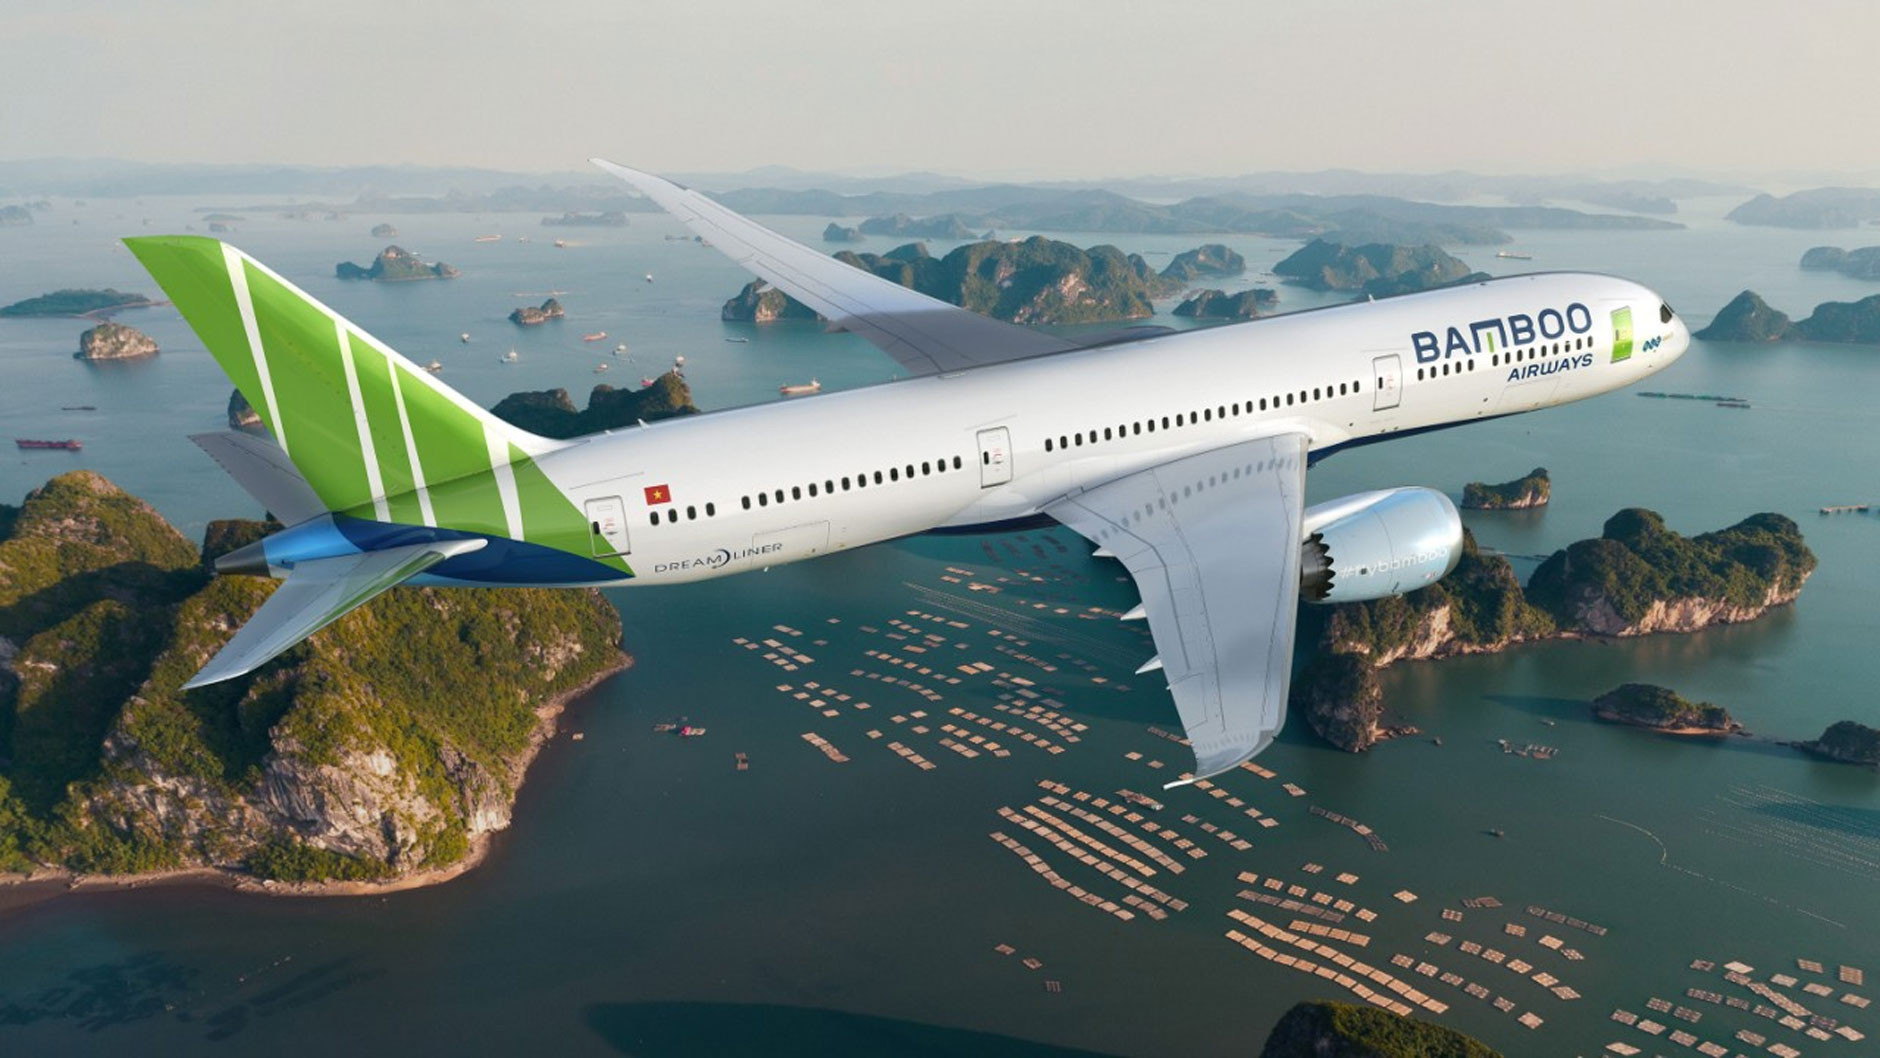 Bamboo Airways replaces new CEO, will recruit foreign managers